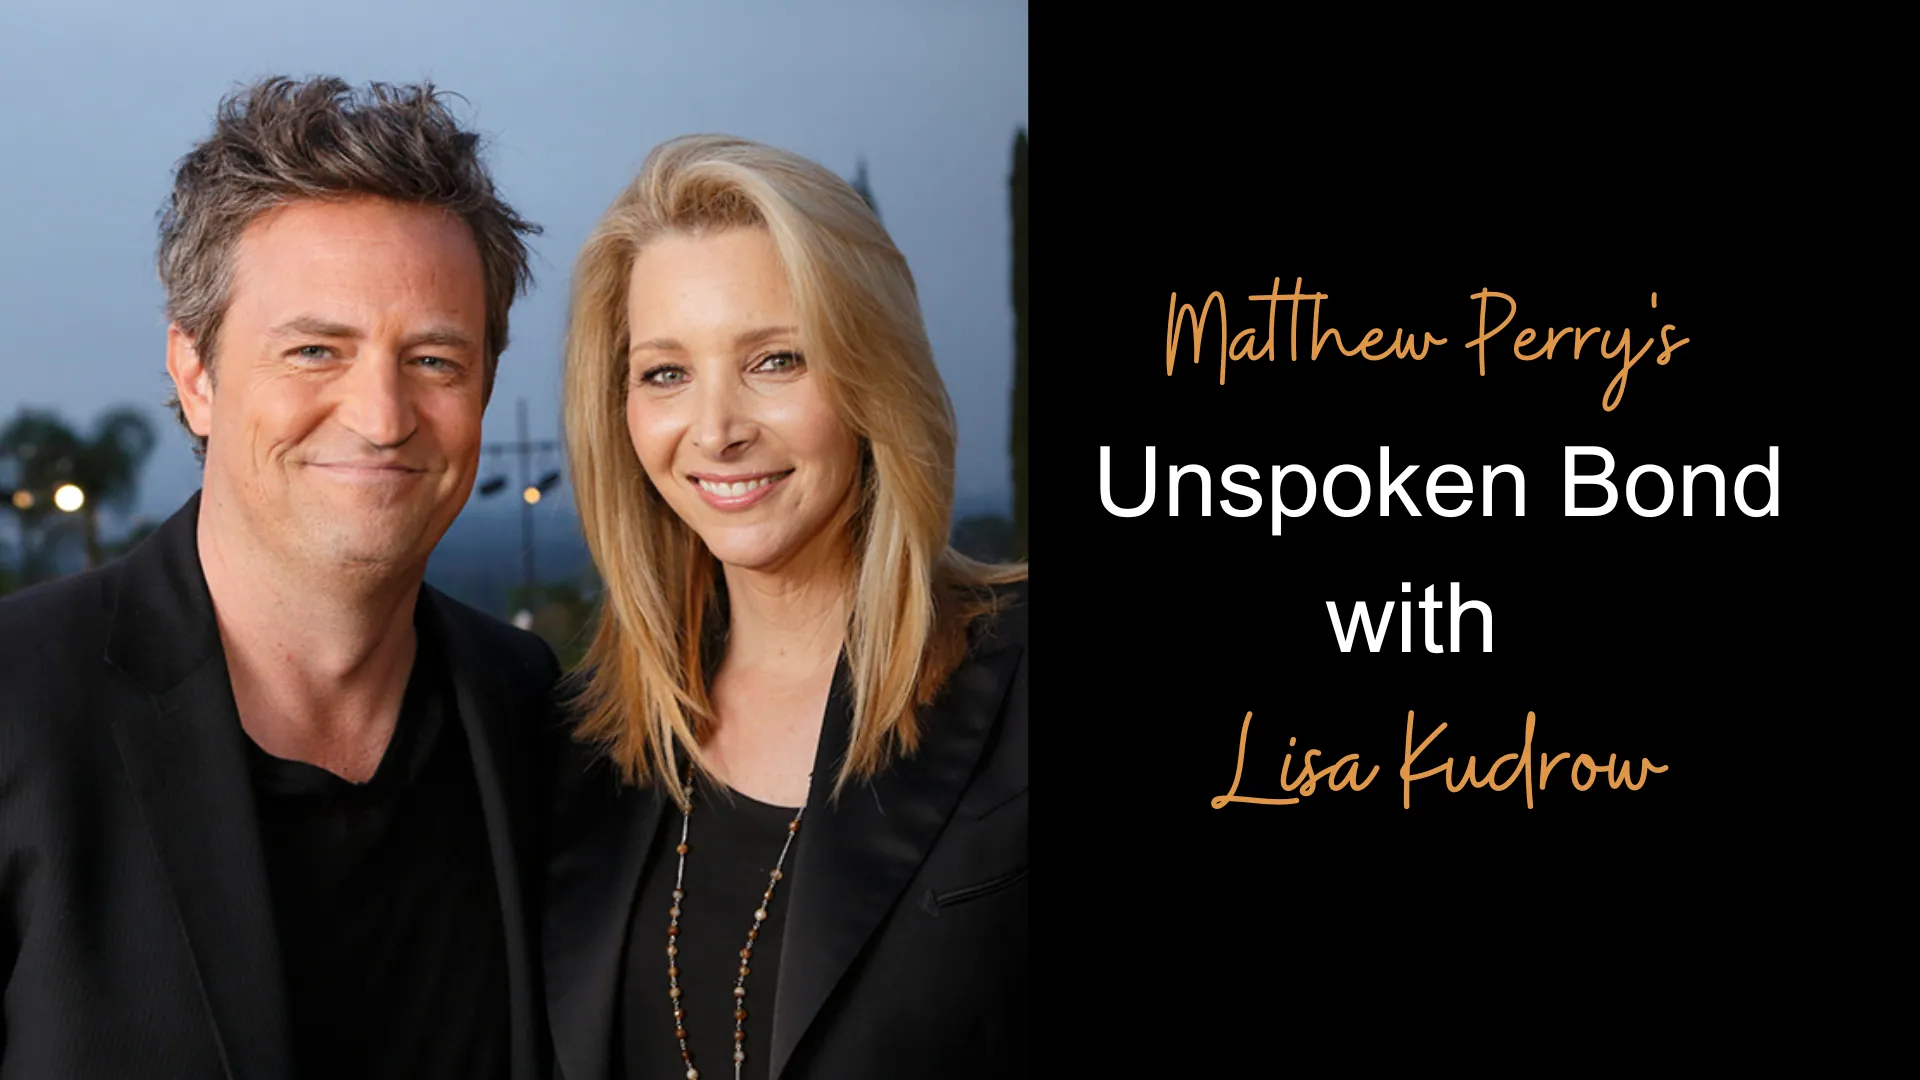 Matthew Perry's Unspoken Bond with Lisa Kudrow Friends Forever, On and Off Set (1)